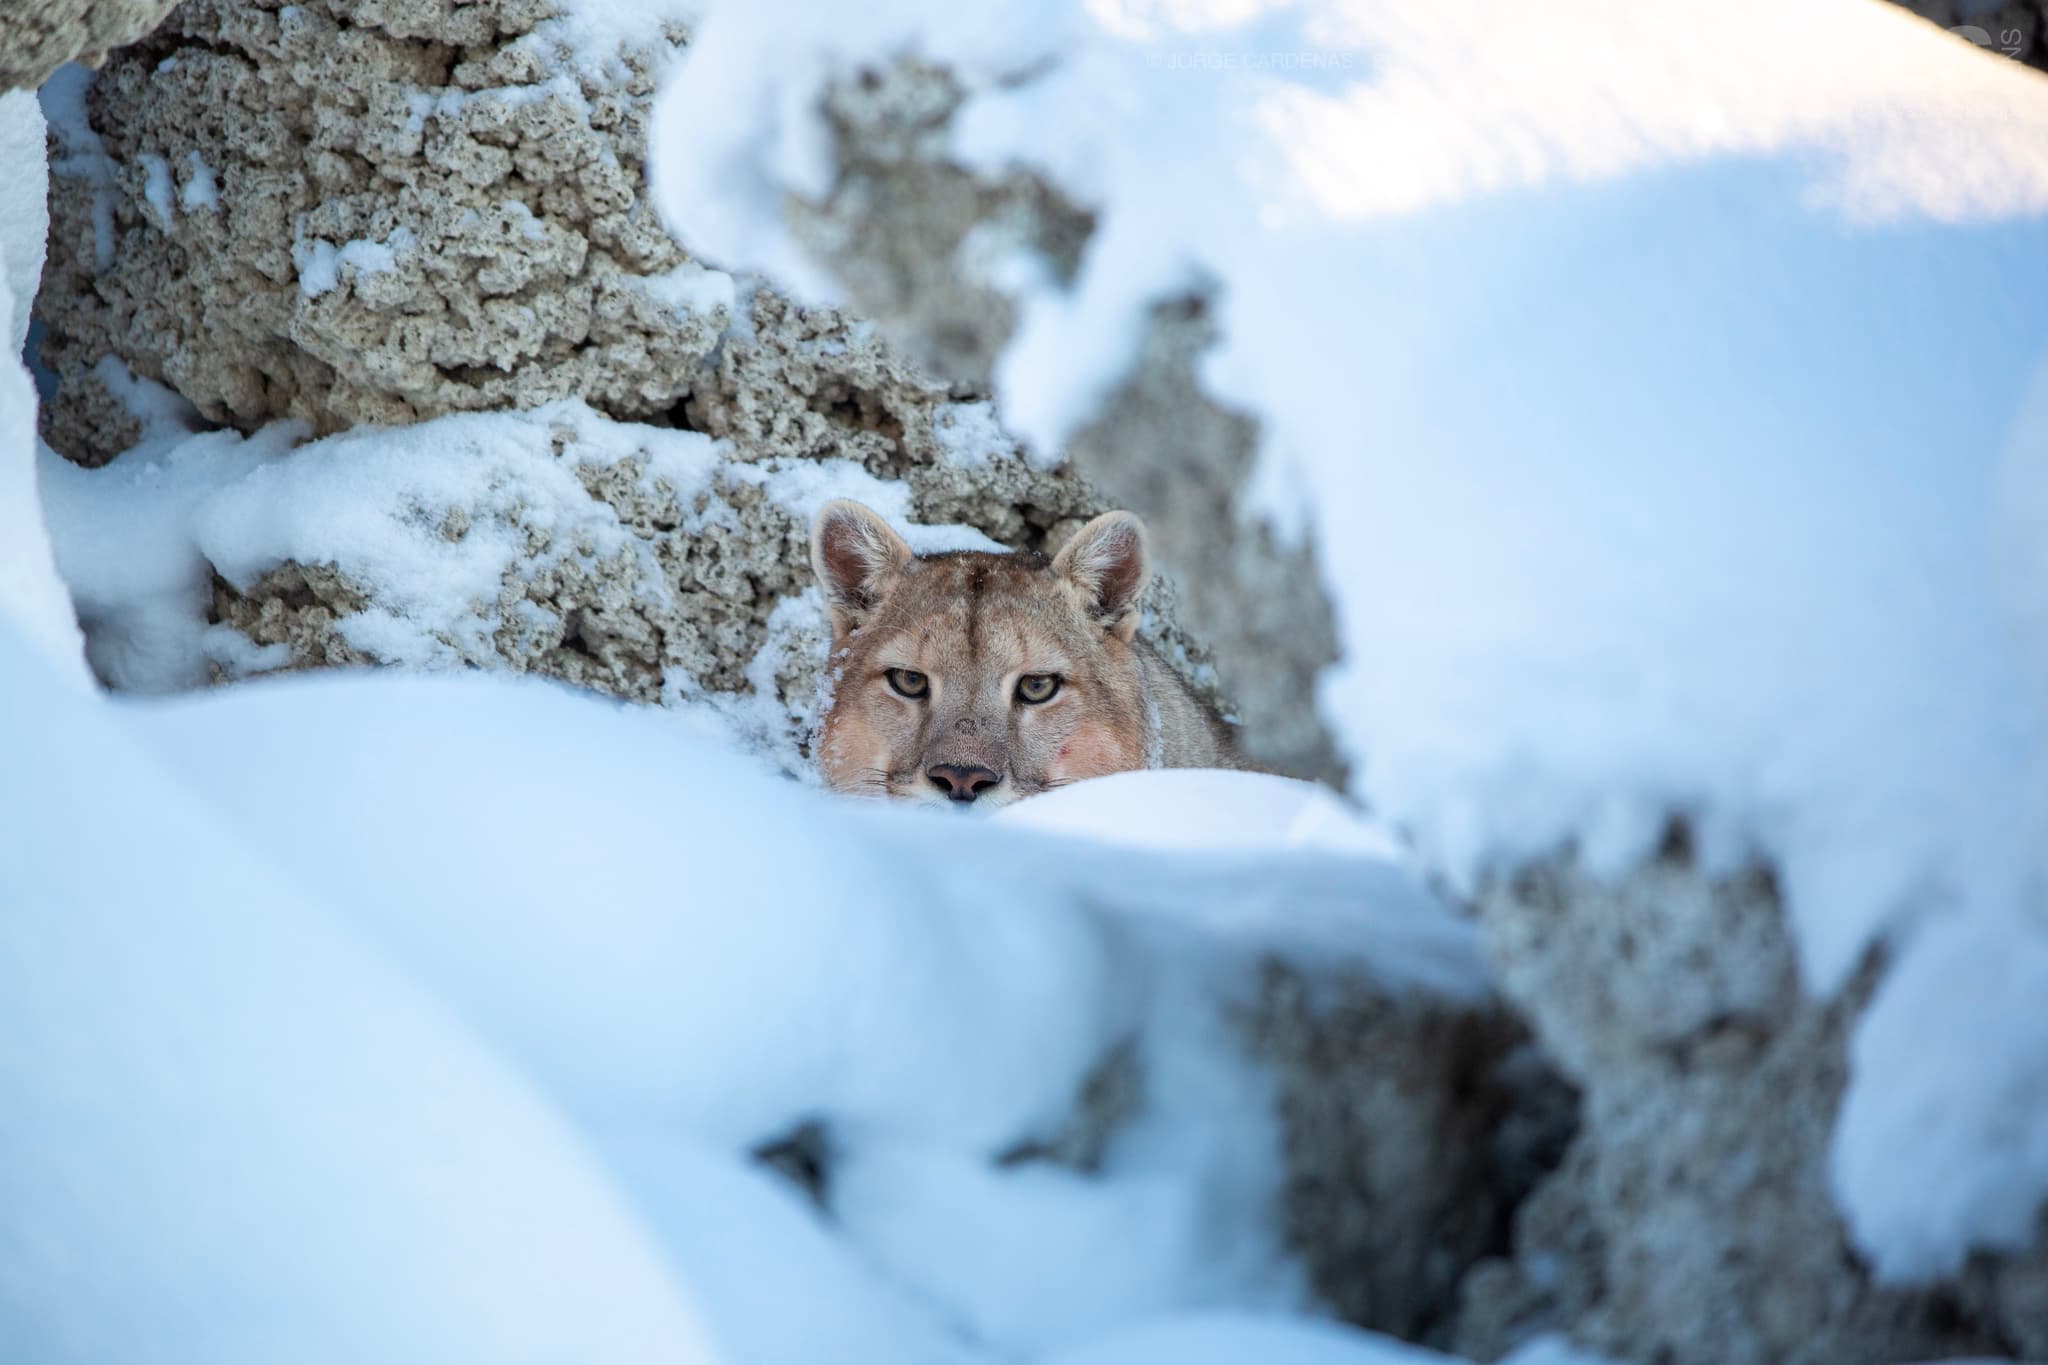 A Puma Peers From Behind A Rocky Outcrop After Snowfall, In The Torres Del Paine National Park